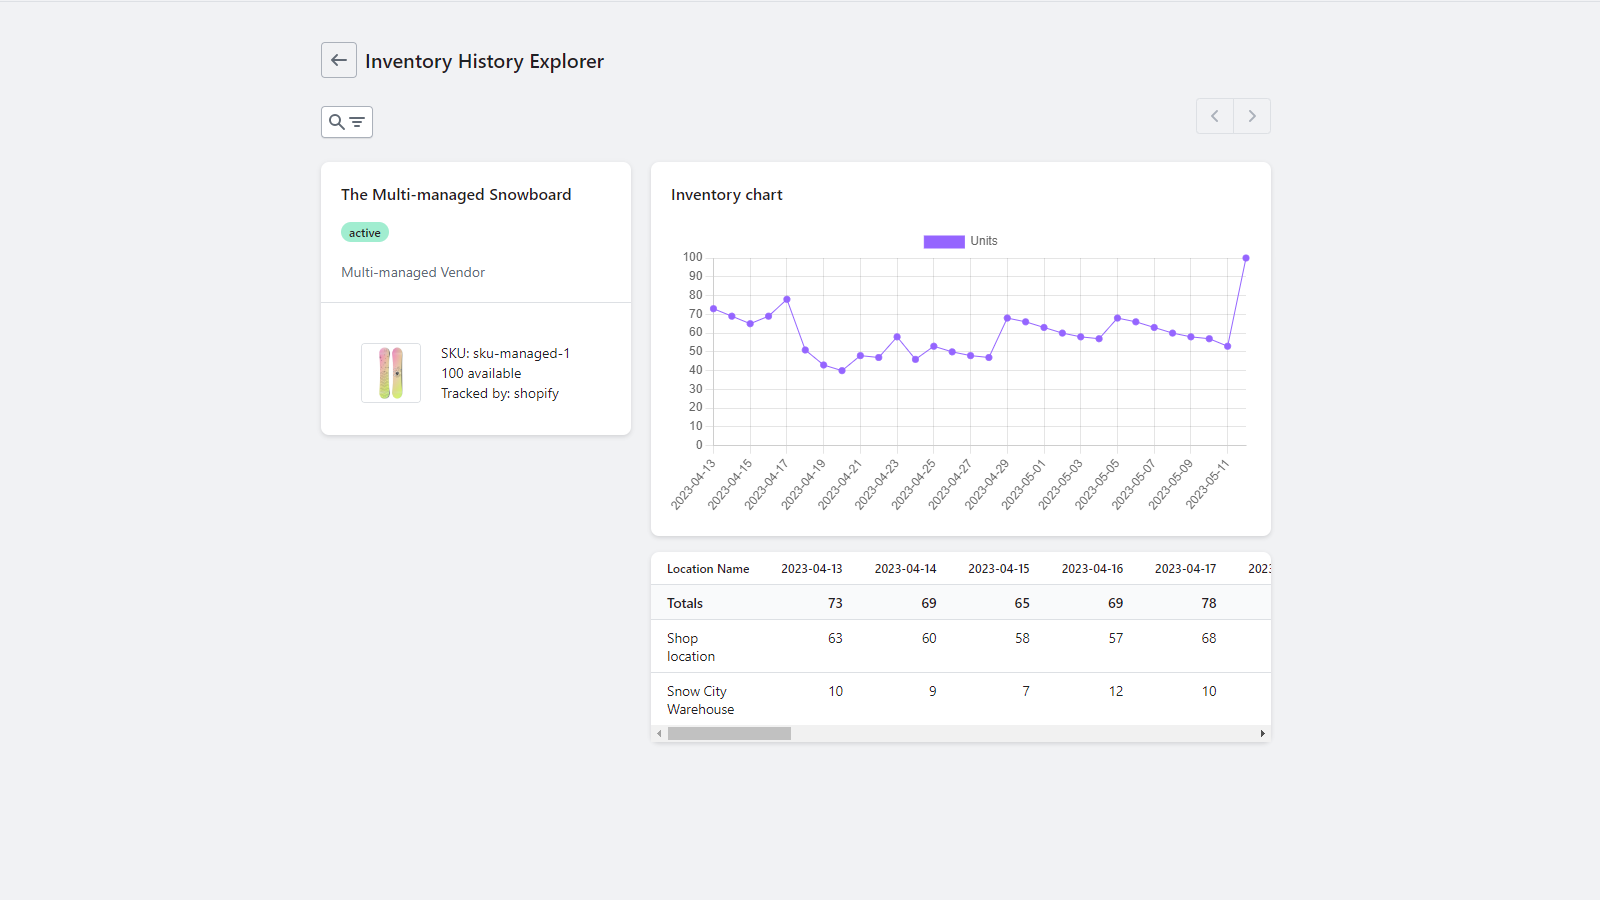 Inventory history dashboard with location level details